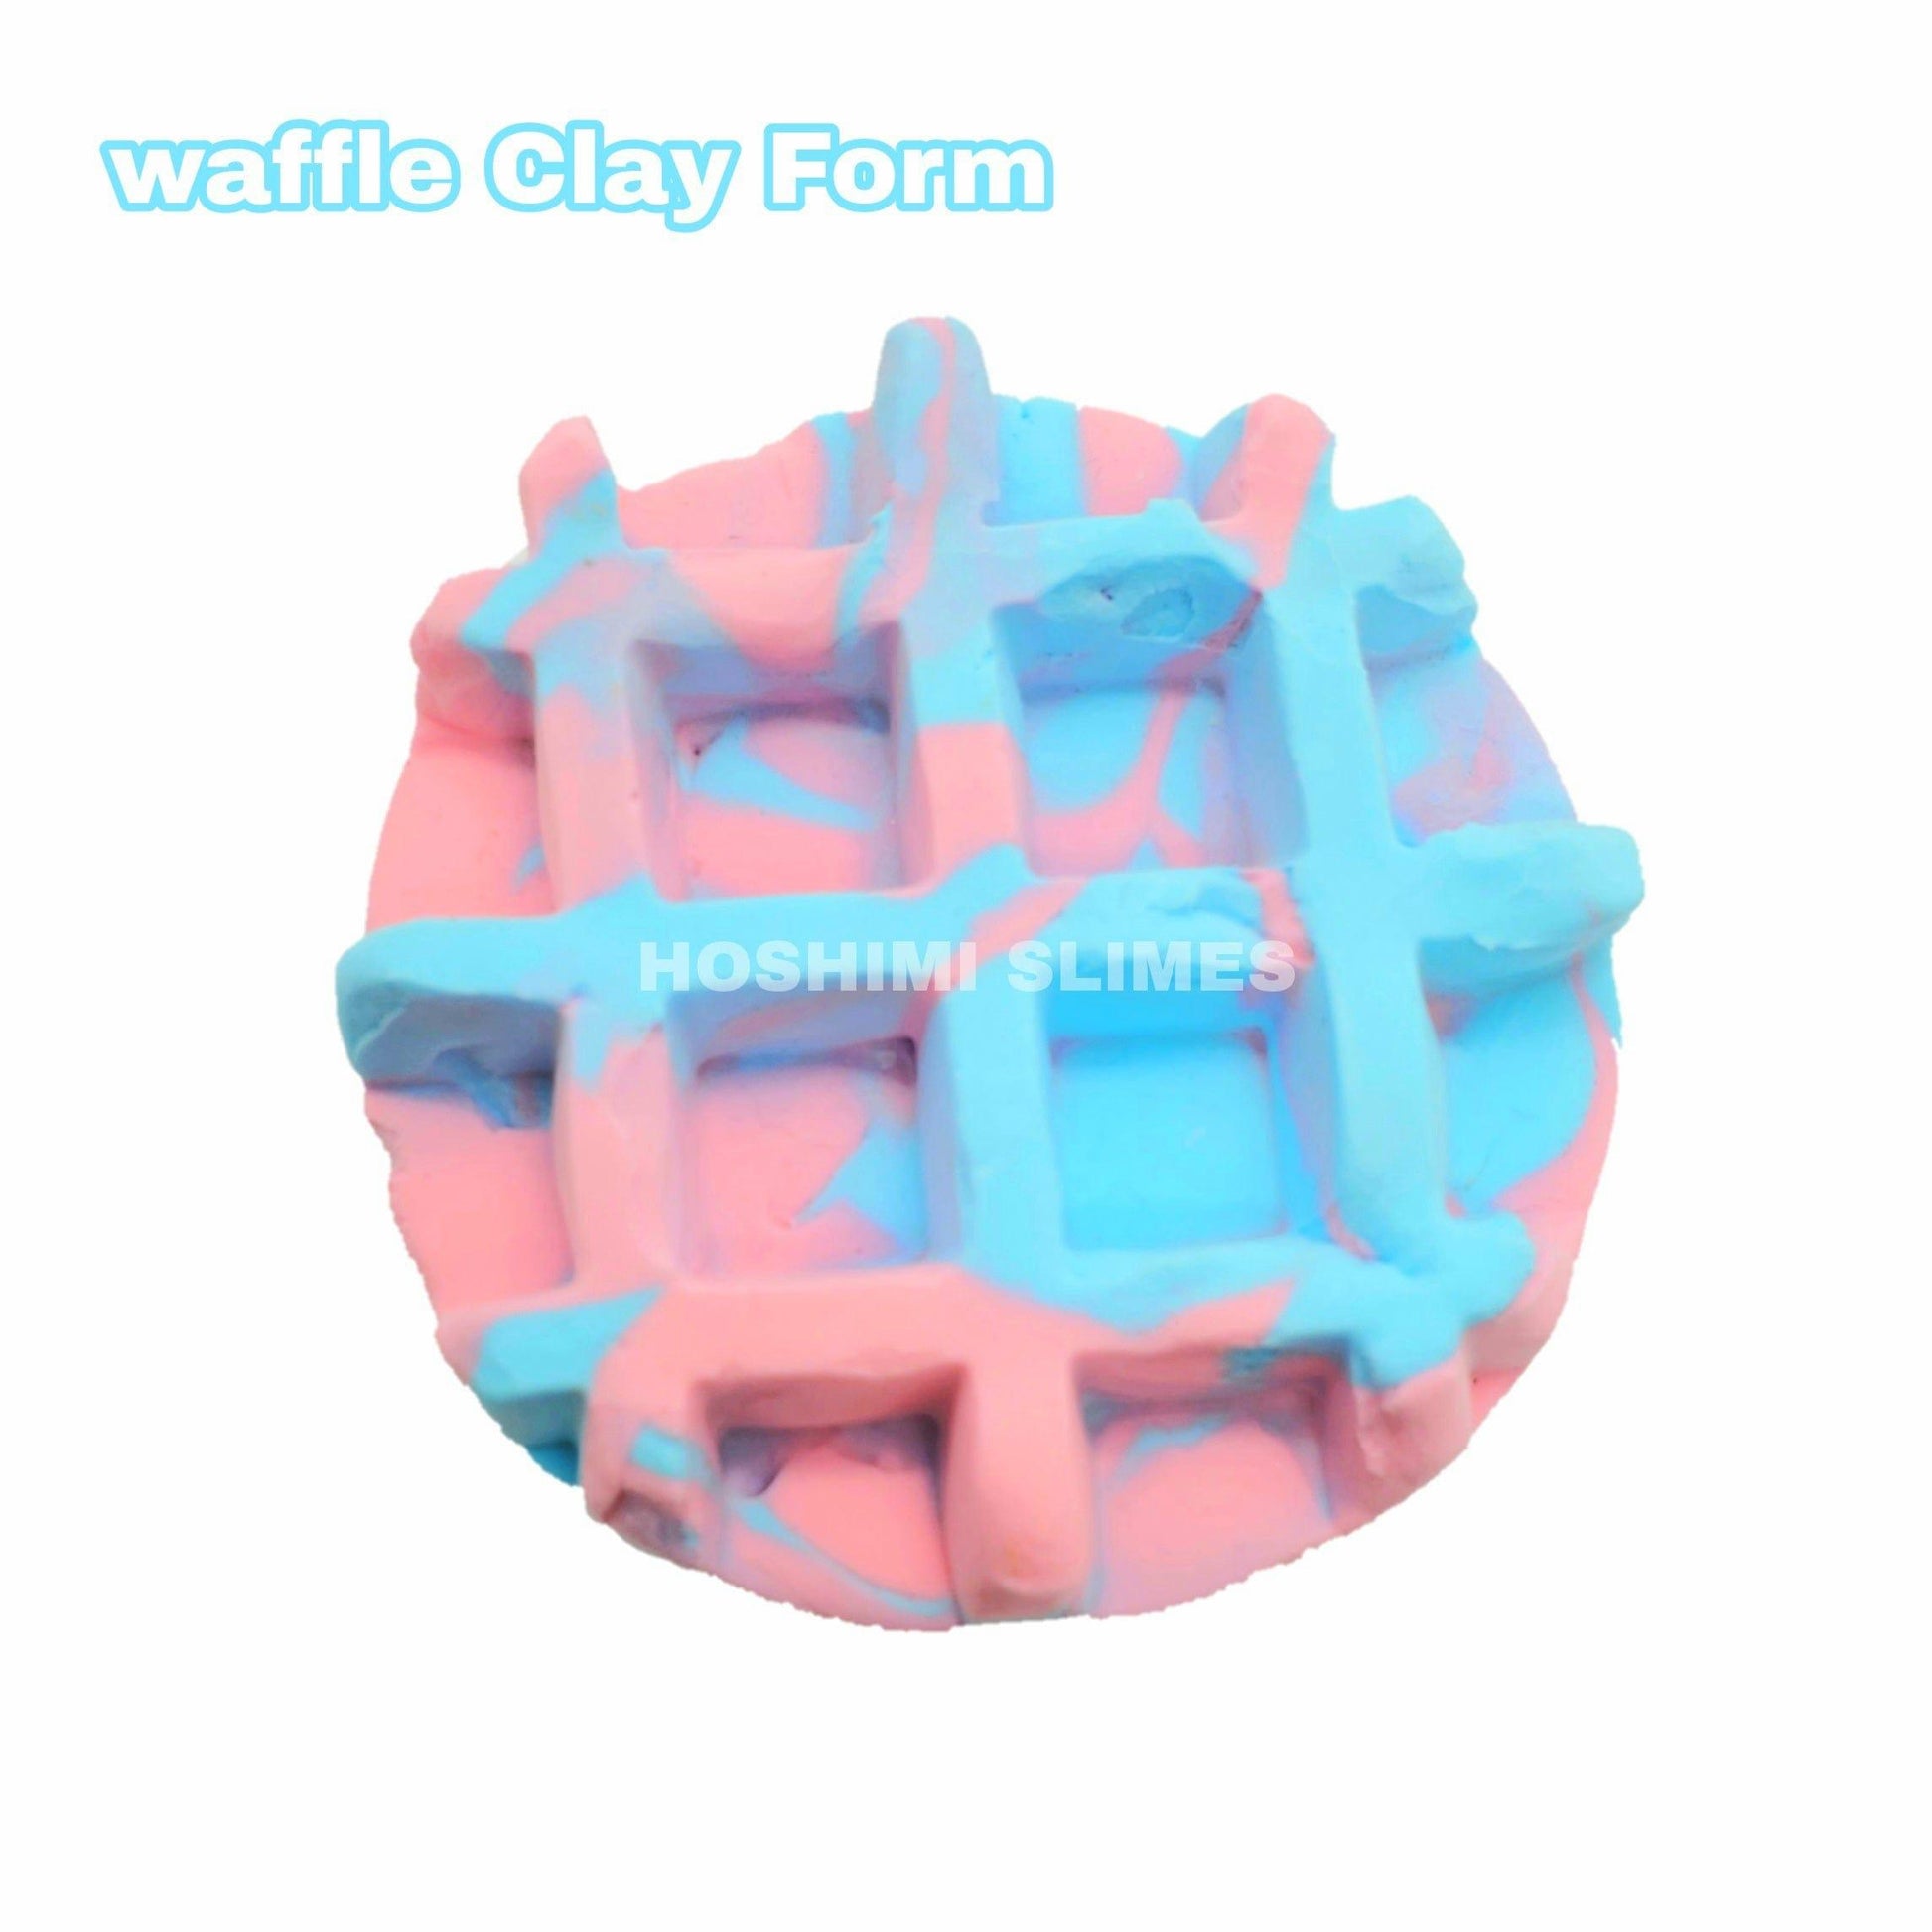 Cotton Candy Waffle DIY Slime Kit slime by Hoshimi Slimes LLC | Hoshimi Slimes LLC